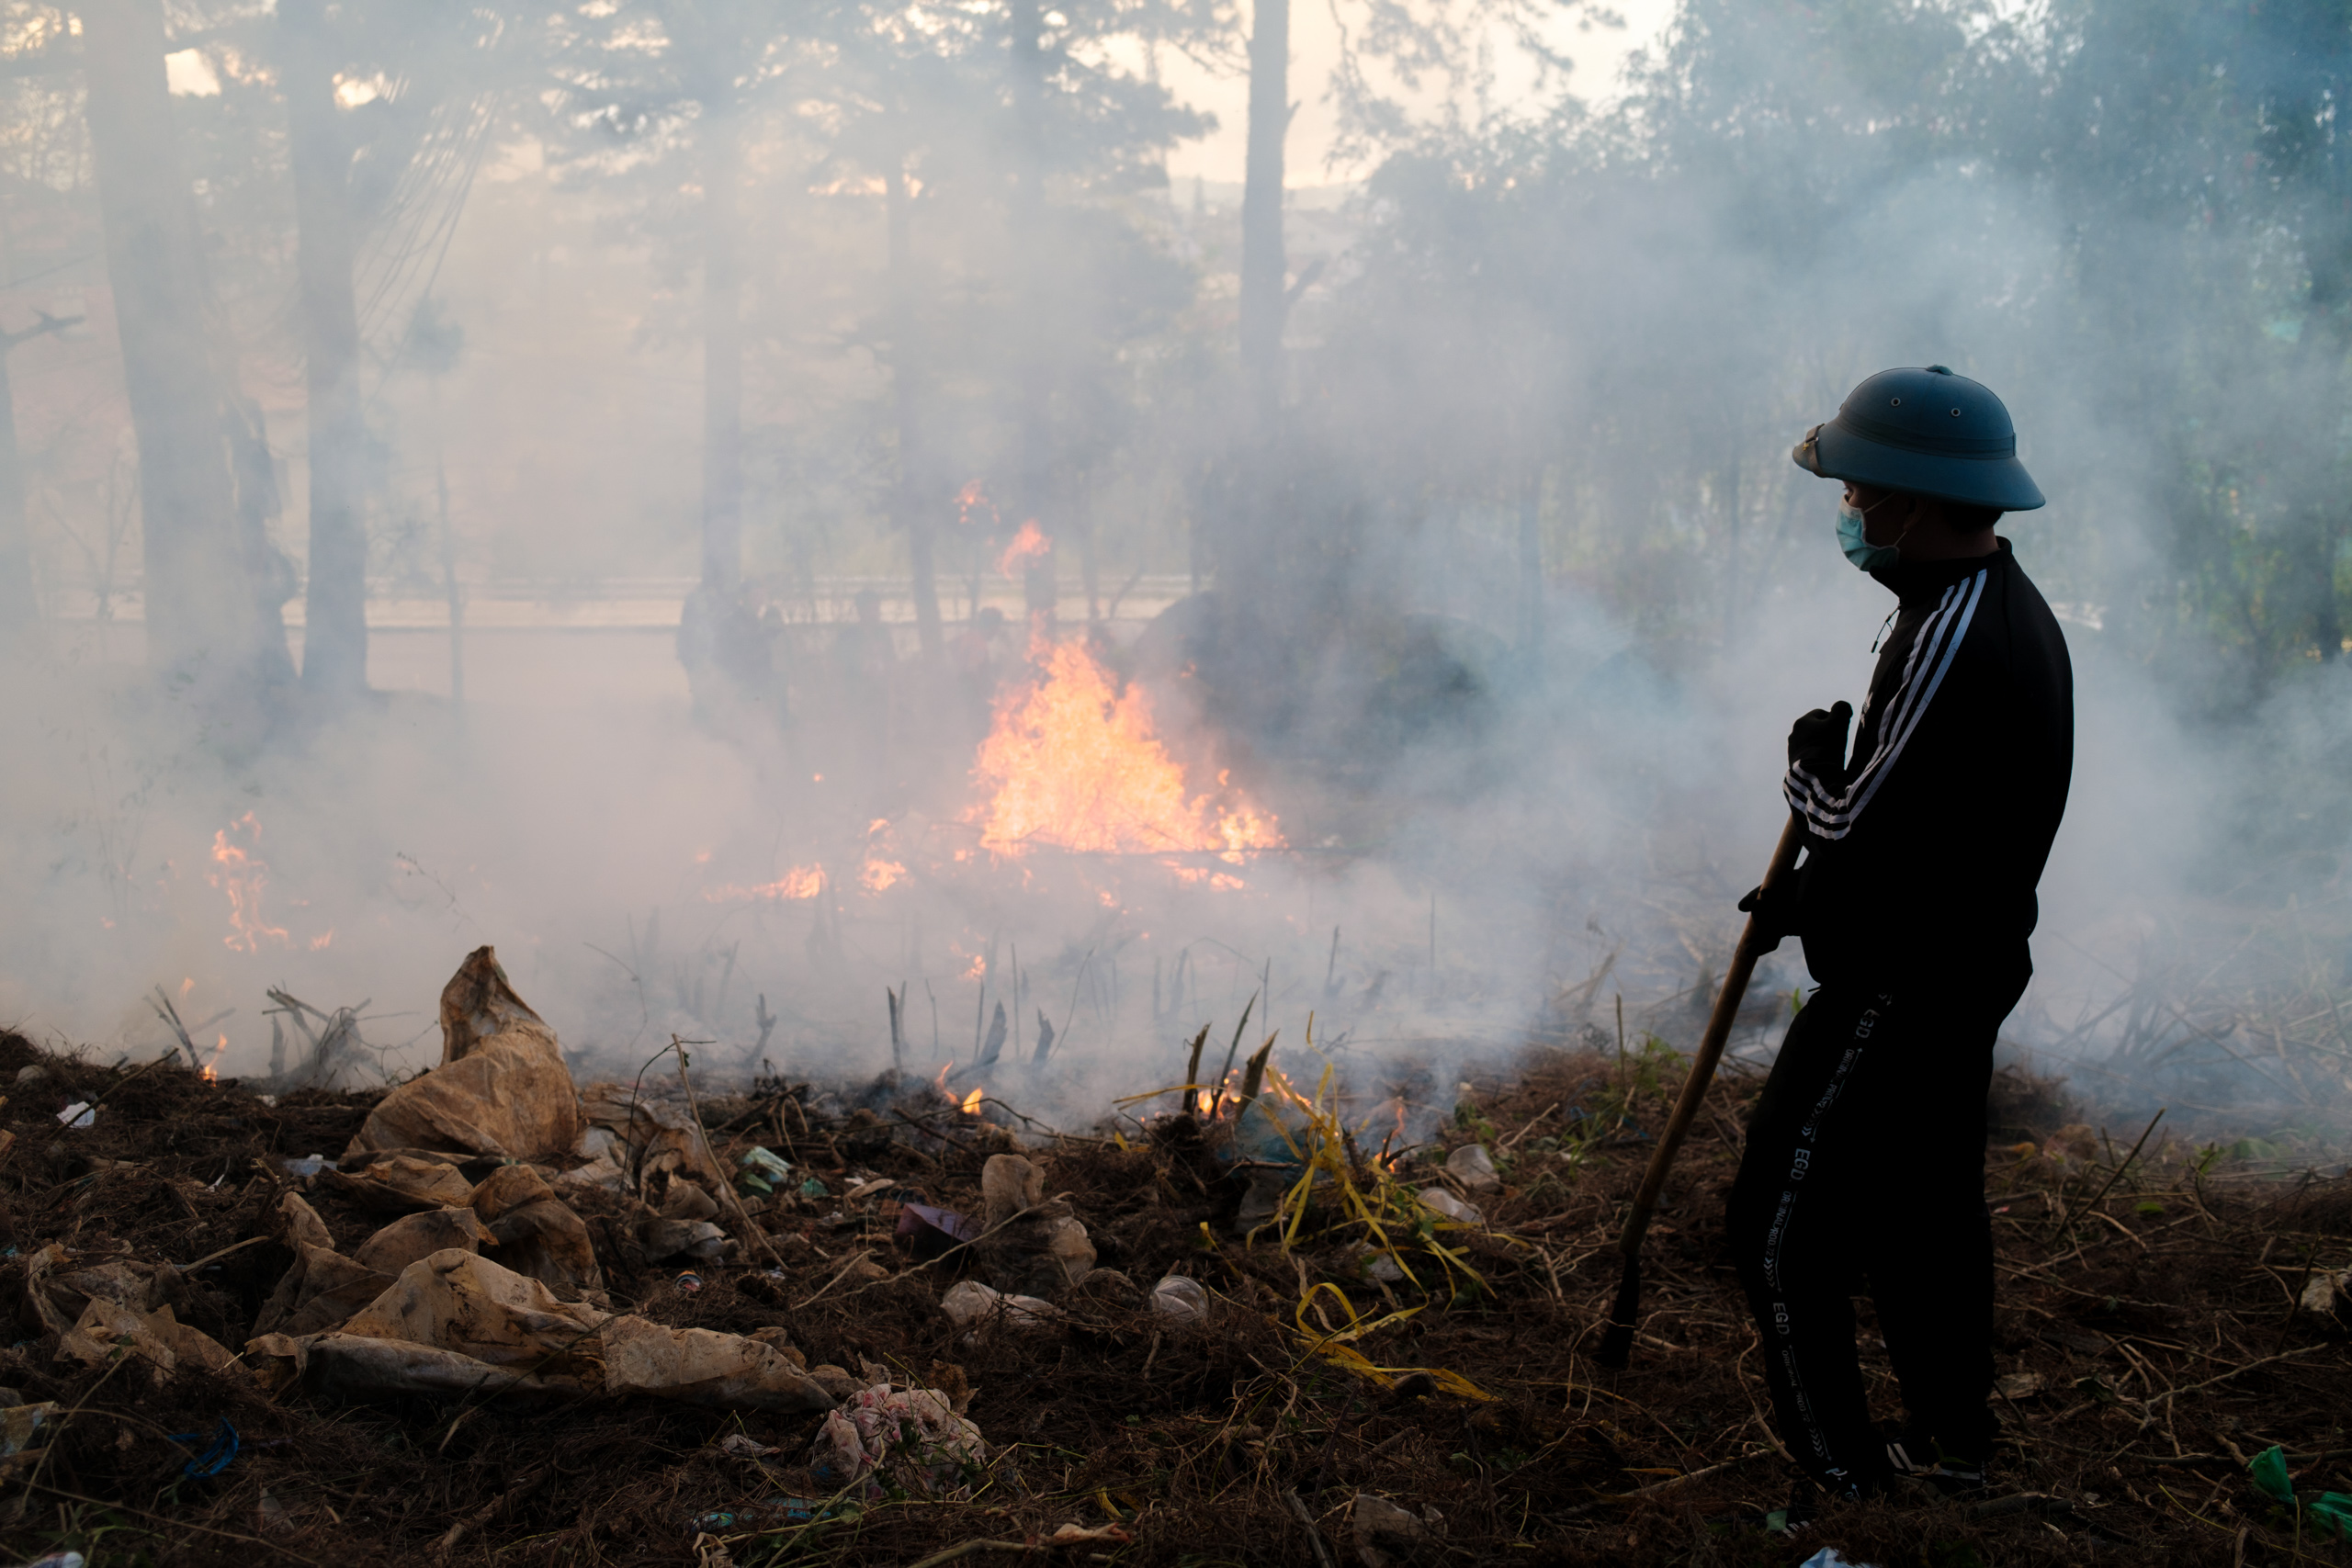 The silhouette of Vietnamese man burning garbage surrounded by smoke